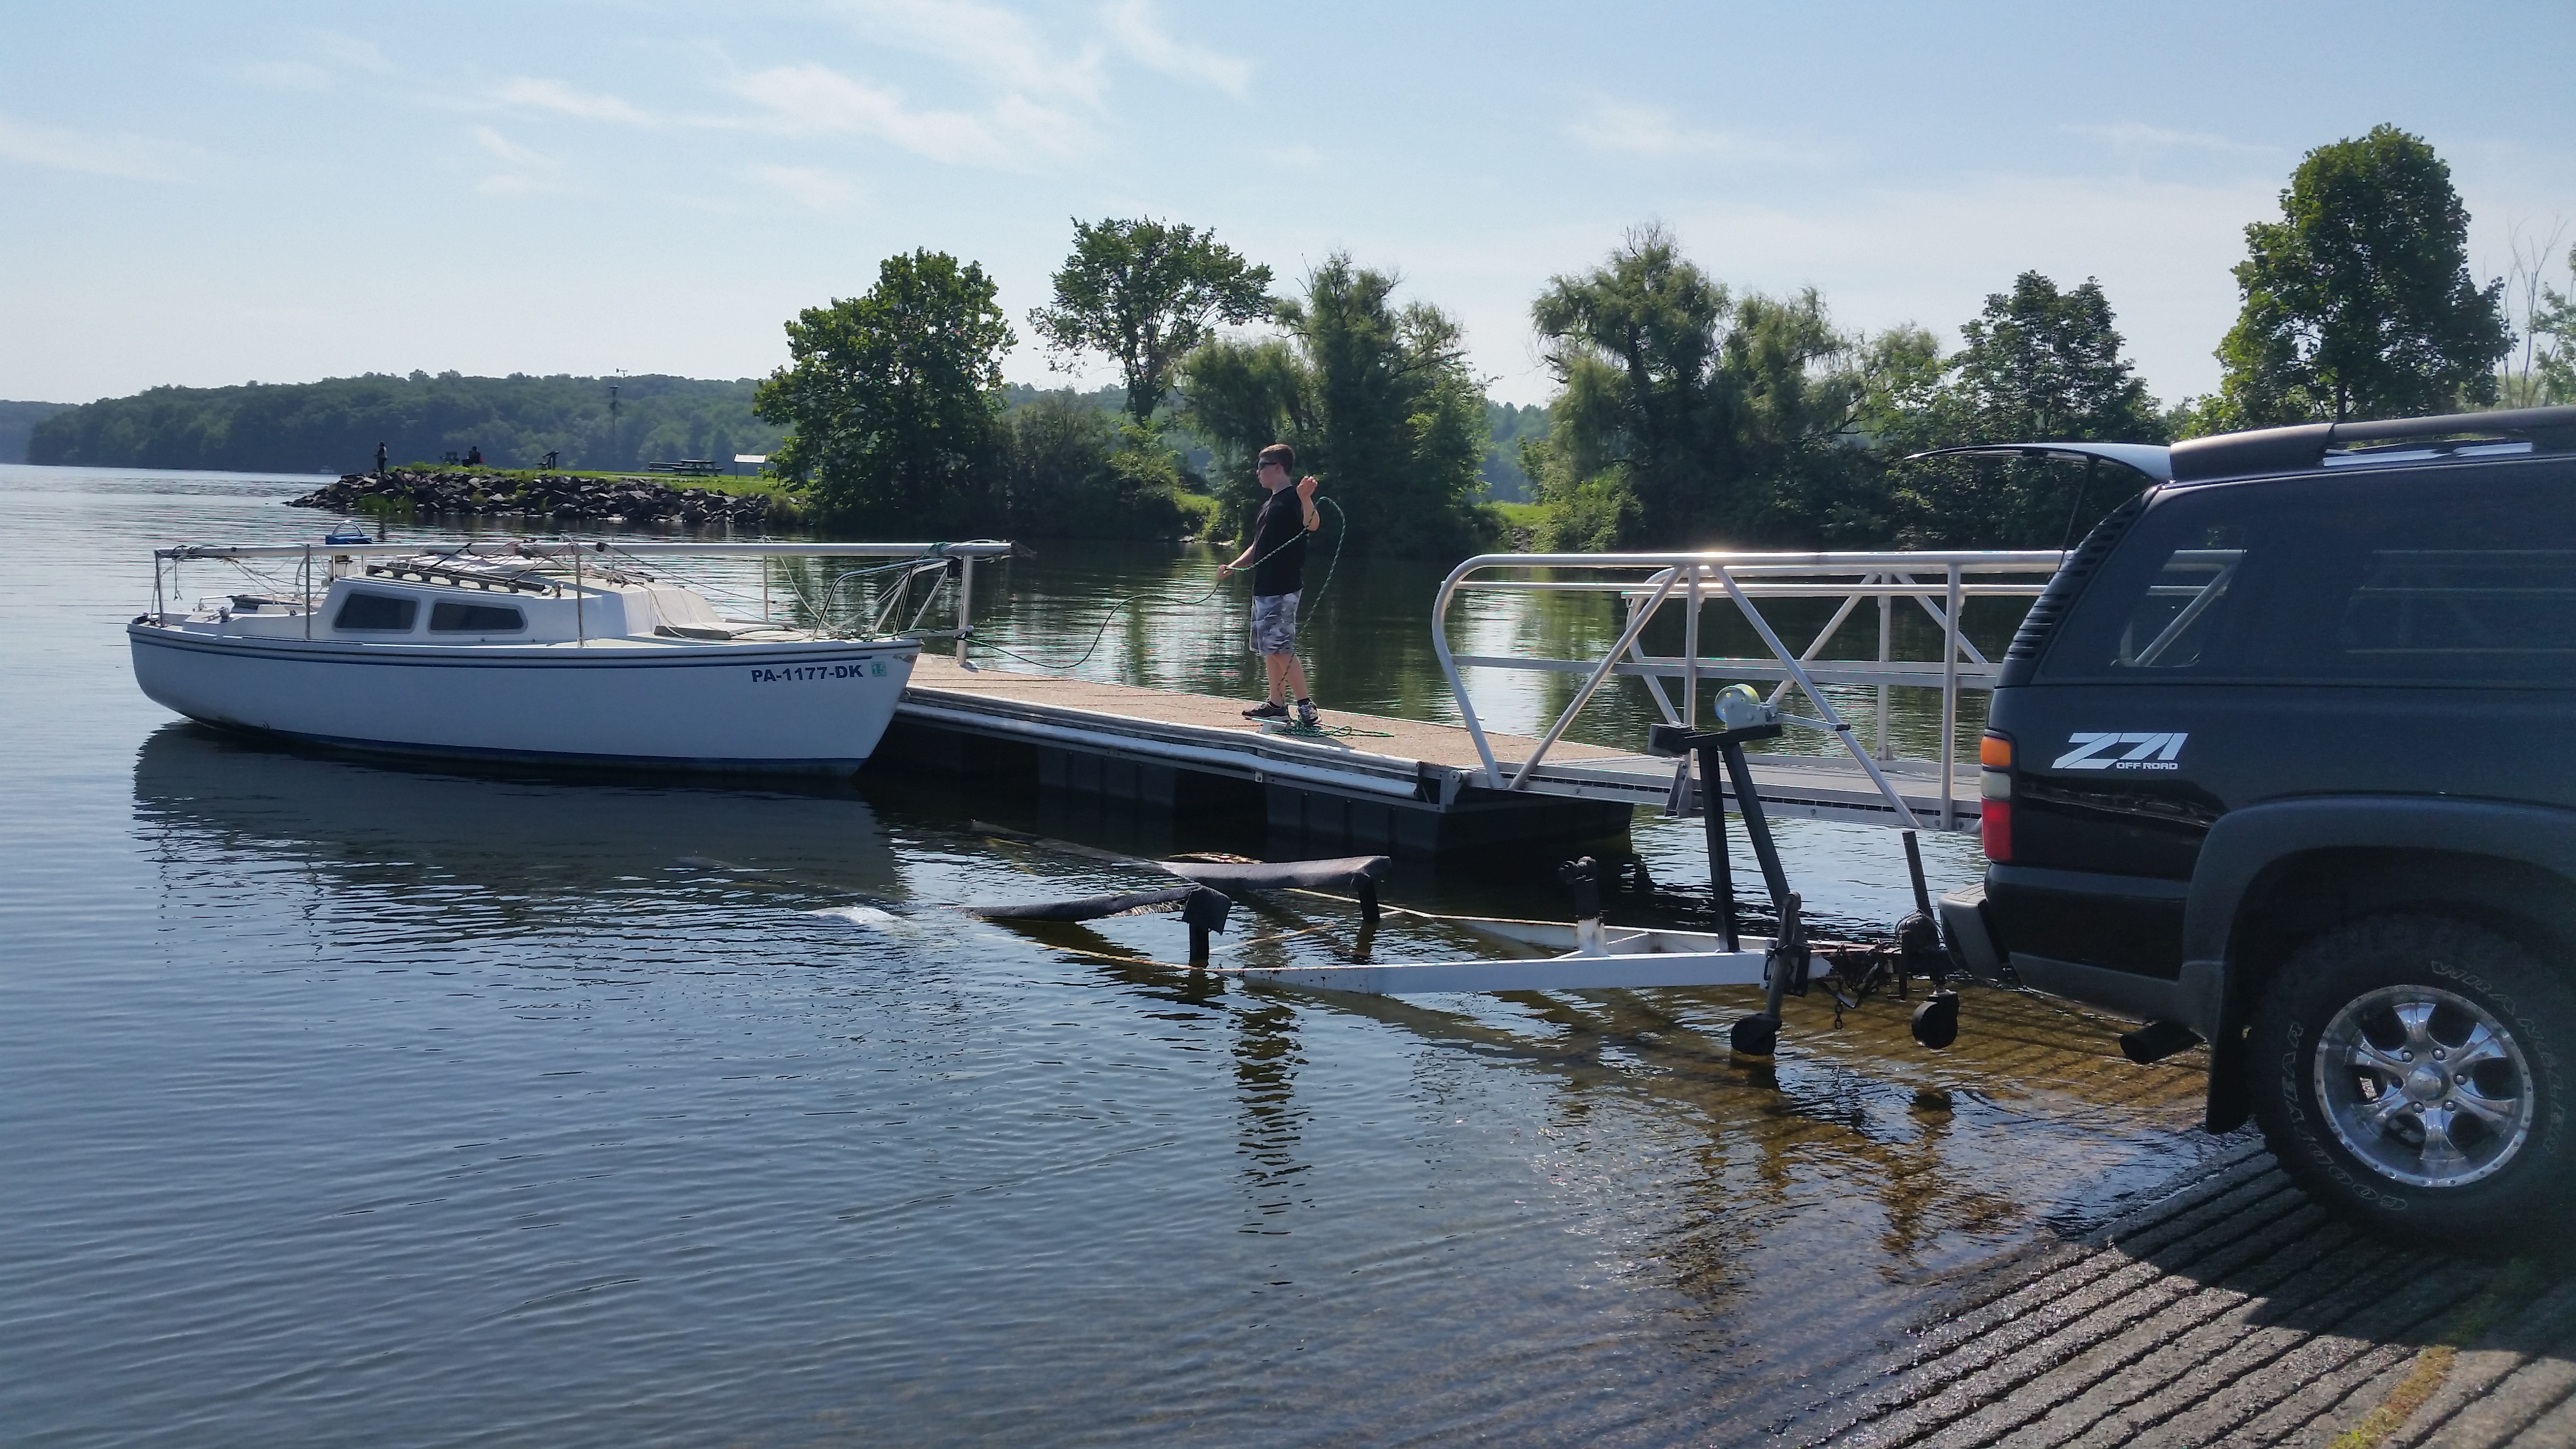 Ship 461's Catalina 22 in the water for the first time in 15 years!